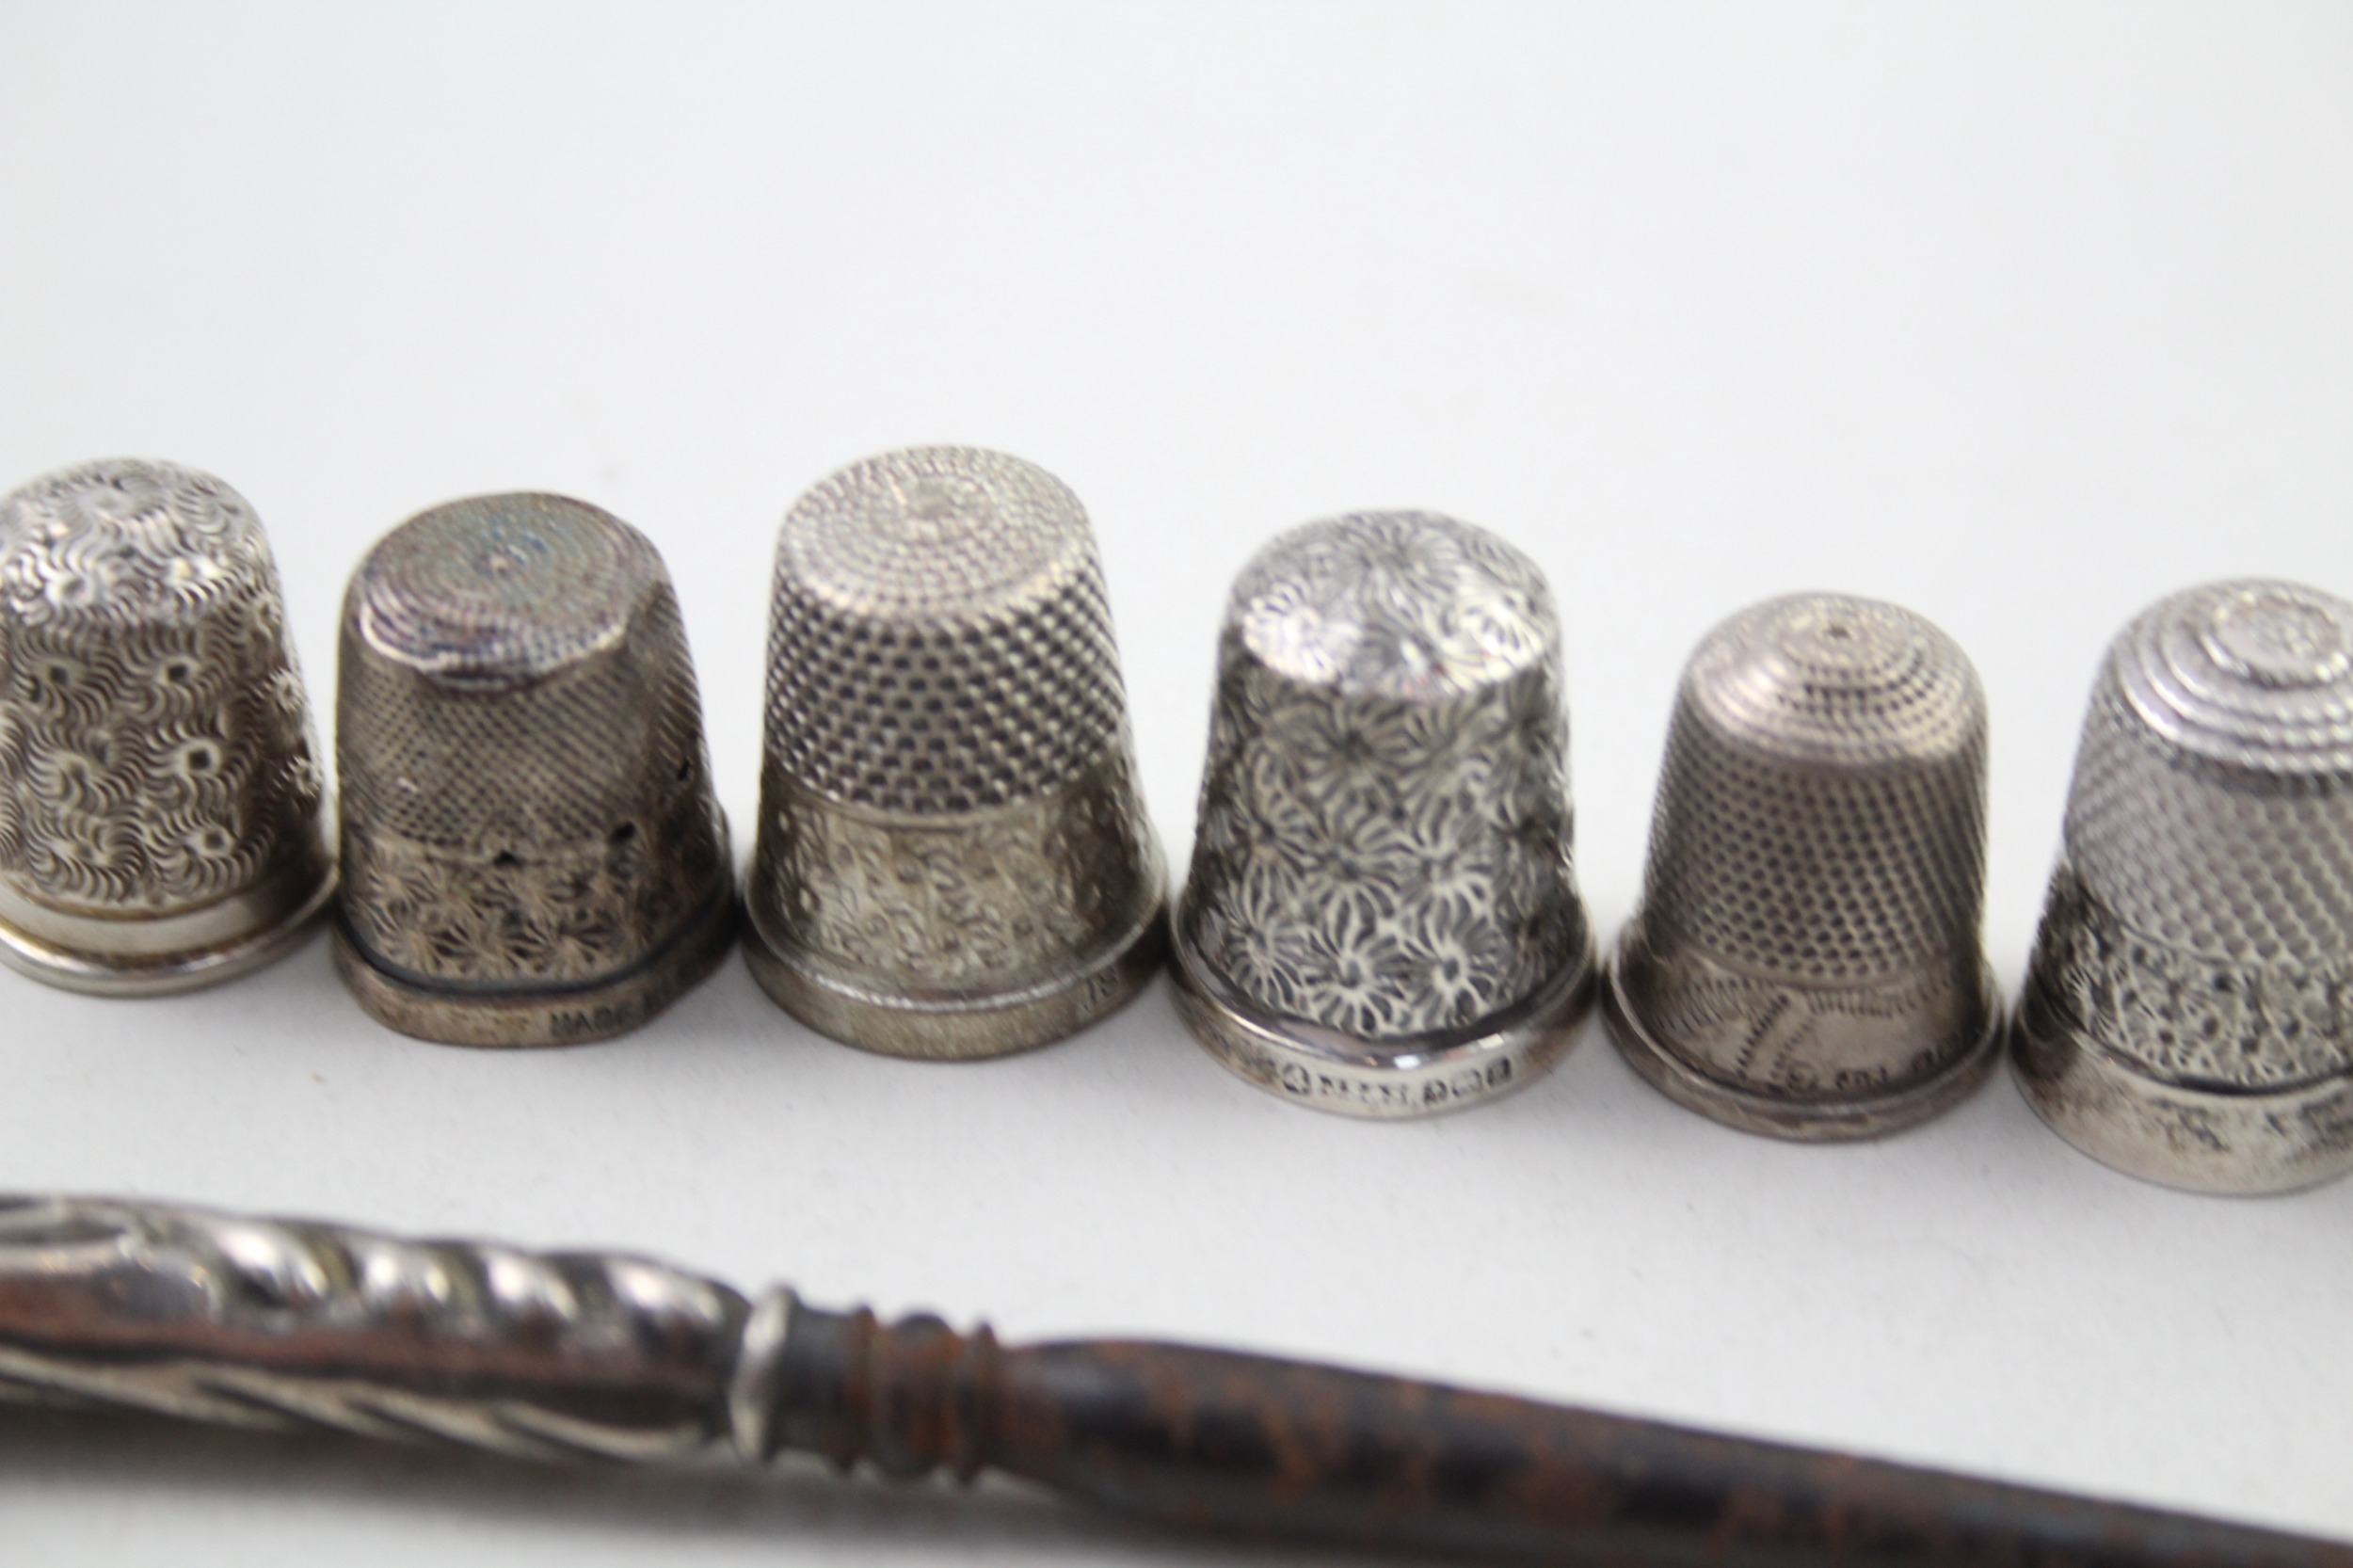 8 x .925 sterling thimbles & handled button hook - Image 4 of 6